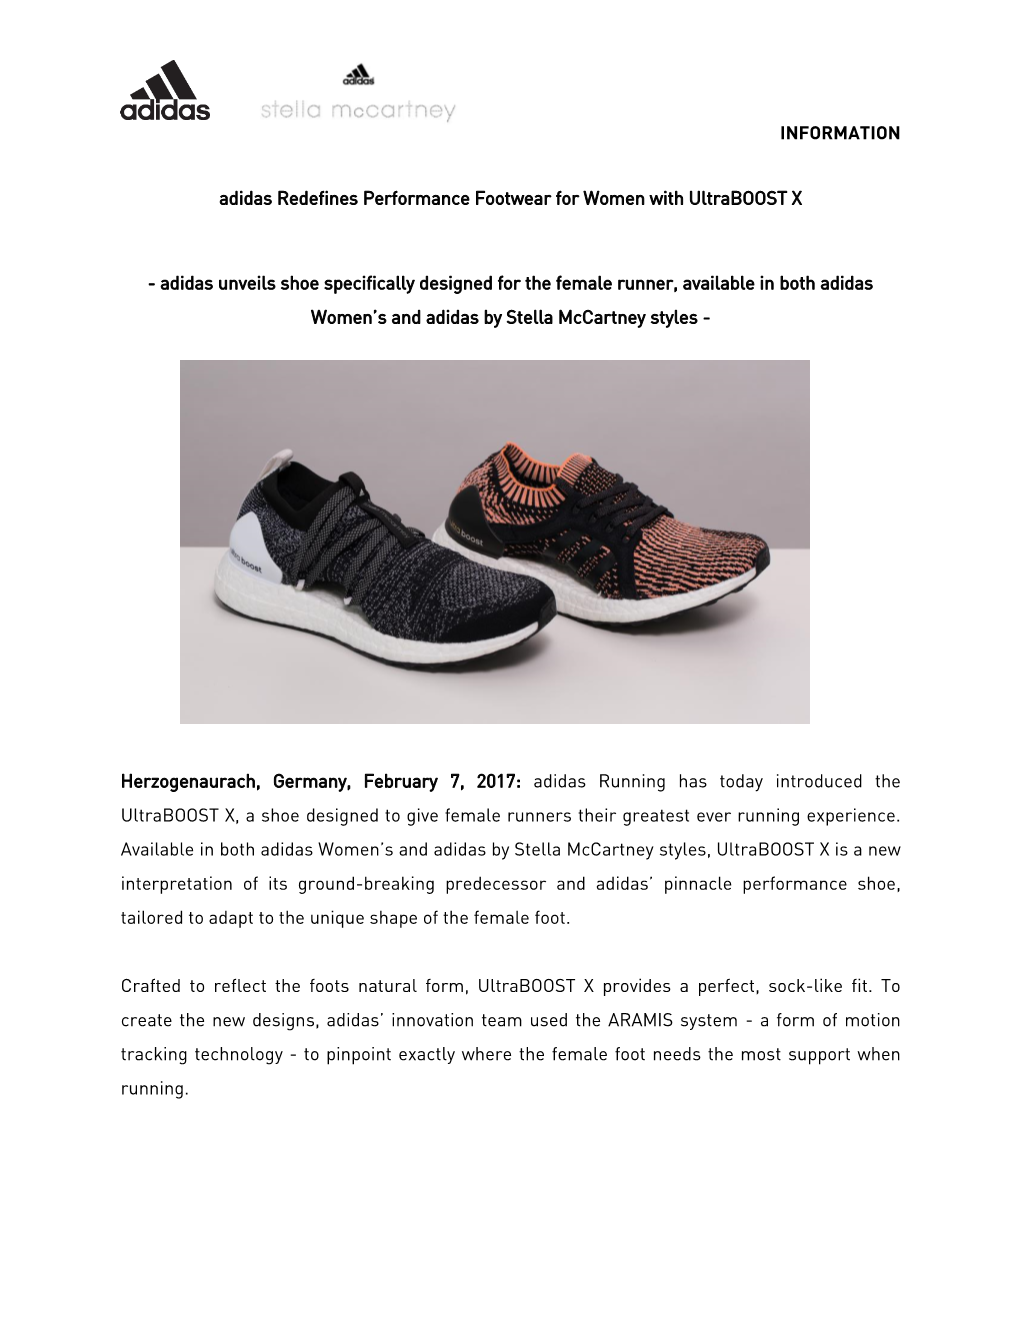 Adidas Unveils Shoe Specifically Designed for the Female Runner, Available in Both Adidas Women’S and Adidas by Stella Mccartney Styles